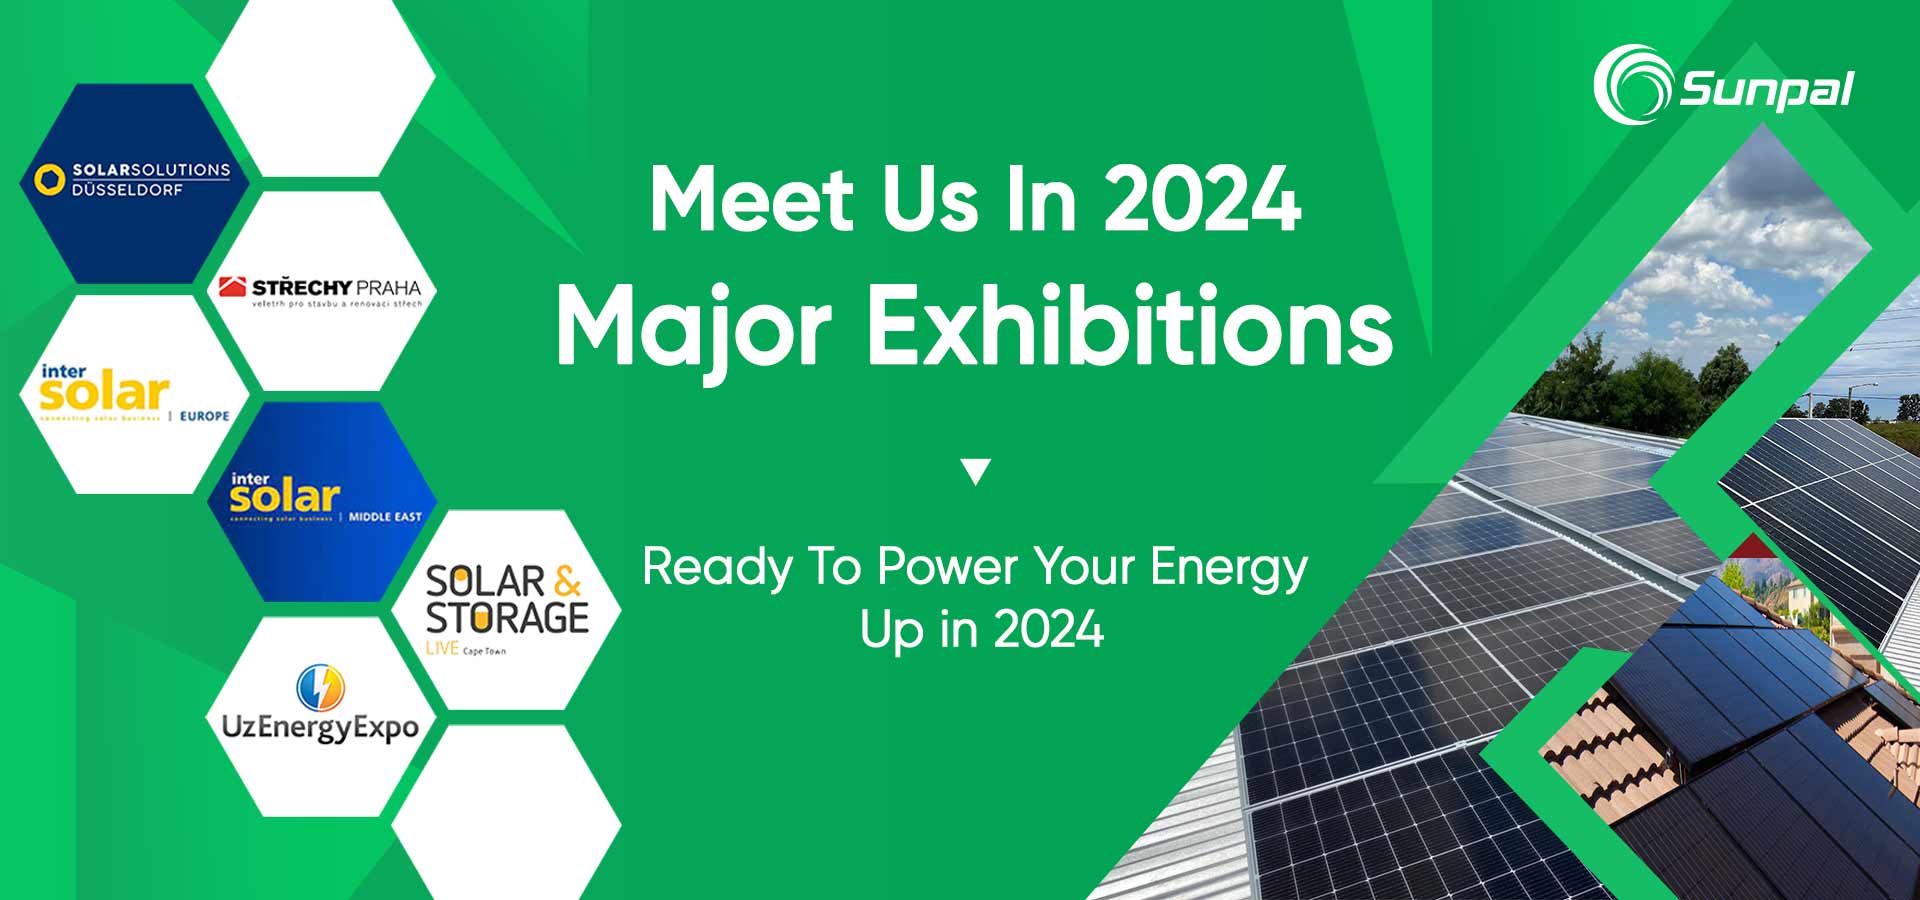 2024 Trade Fairs That Sunpal Power Will Attend To